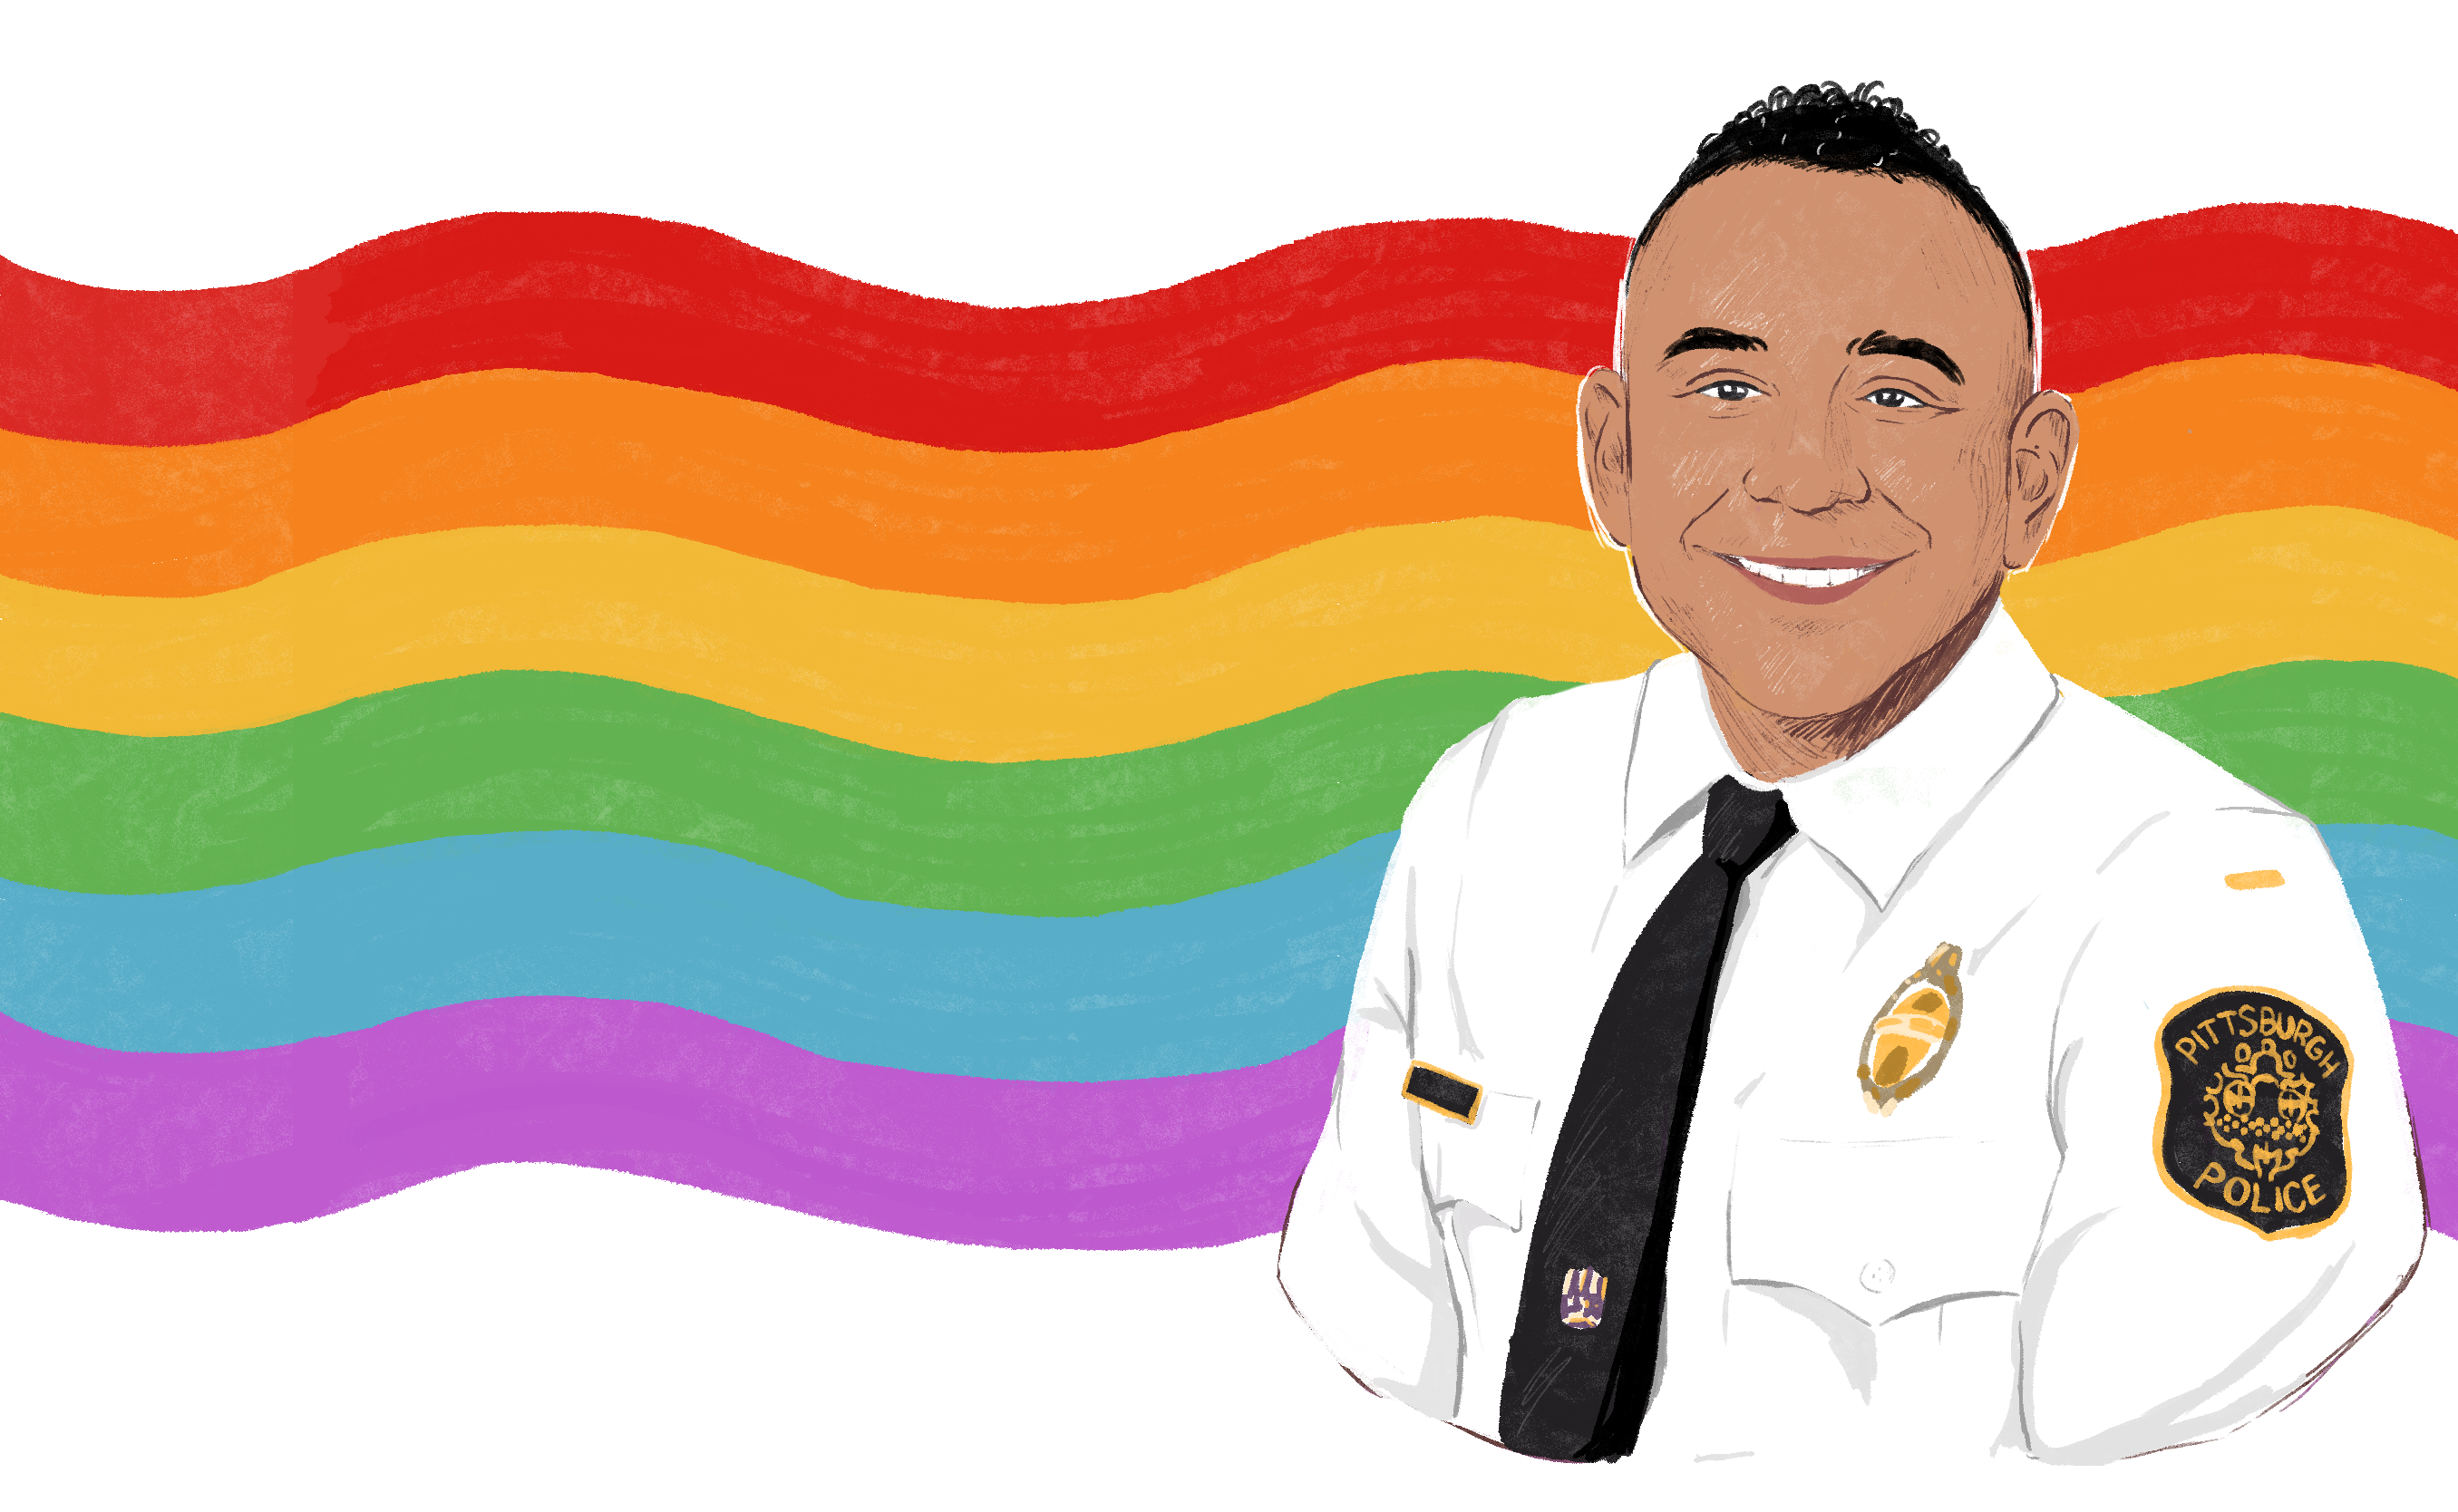 Black Cop Gay Porn Cartoon - Does the identity of Pittsburgh's first gay police chief matter to city's  LGBTQ community? | Pittsburgh City Paper